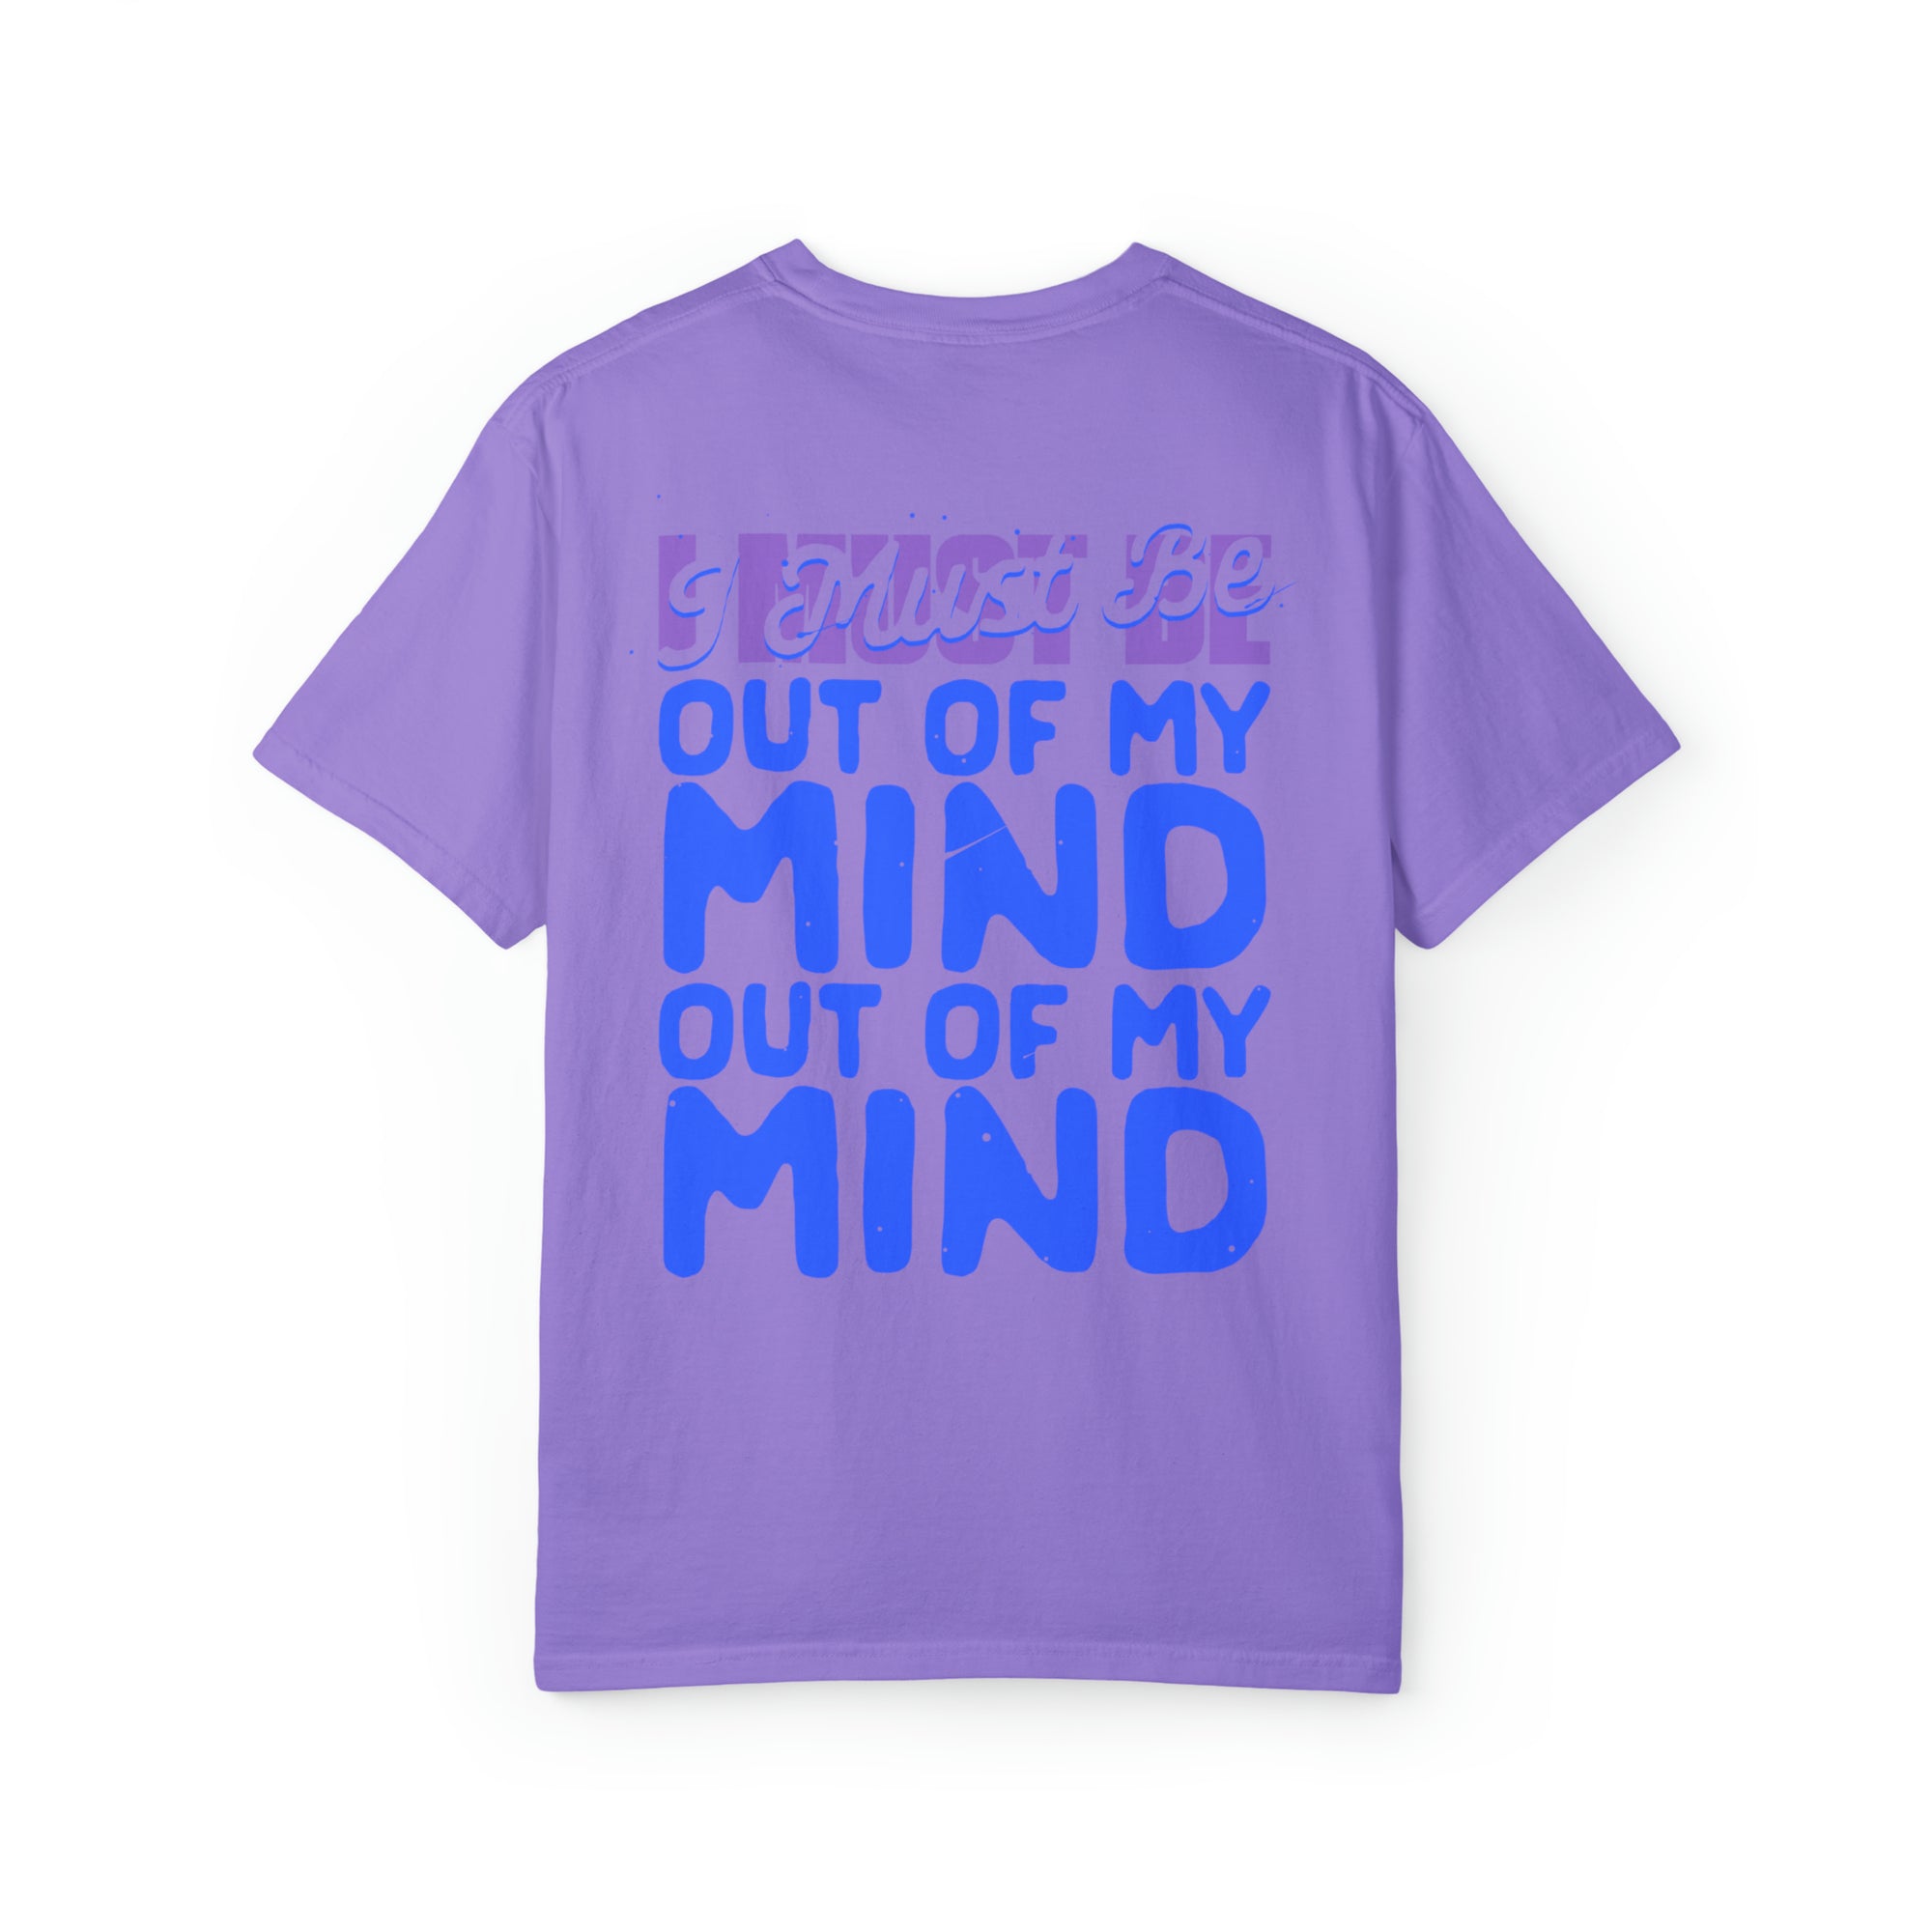 Out Of My Mind Tee - Adult